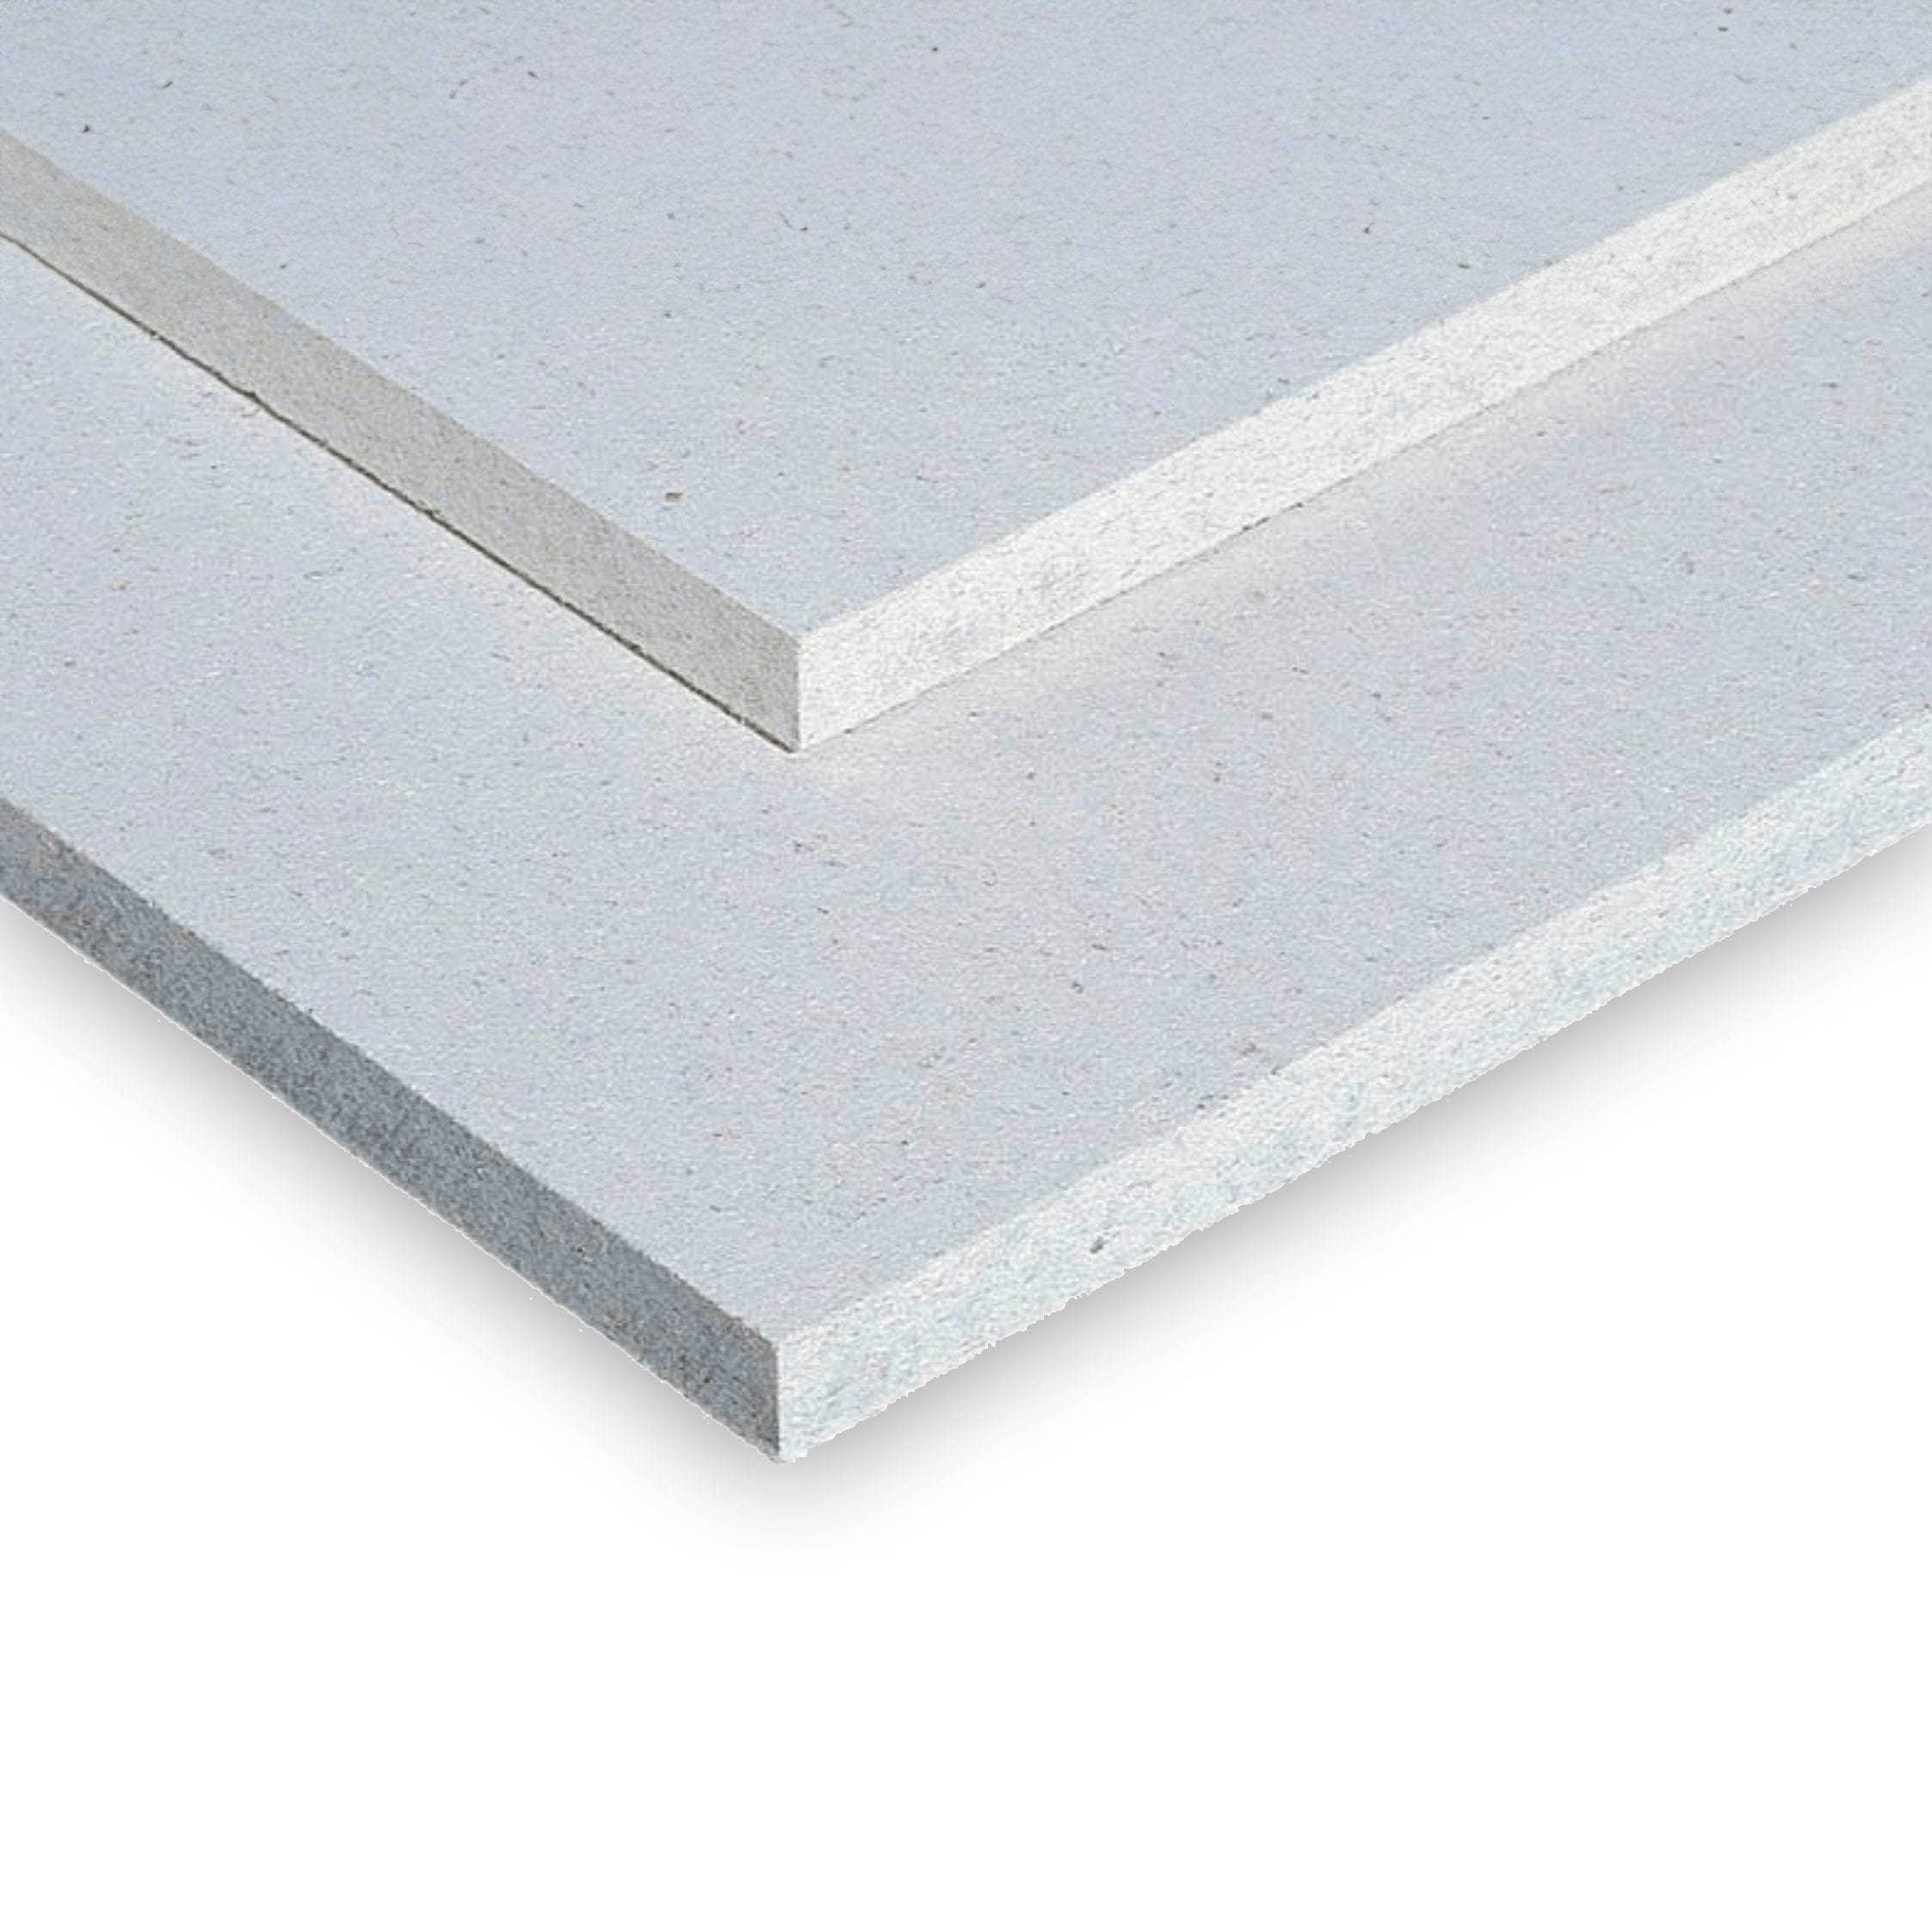 Fermacell Fermacell® 2E11 Dry Screed Overlay Board | 1500mm x 500mm x 20mm 4007548004077 IUK01528